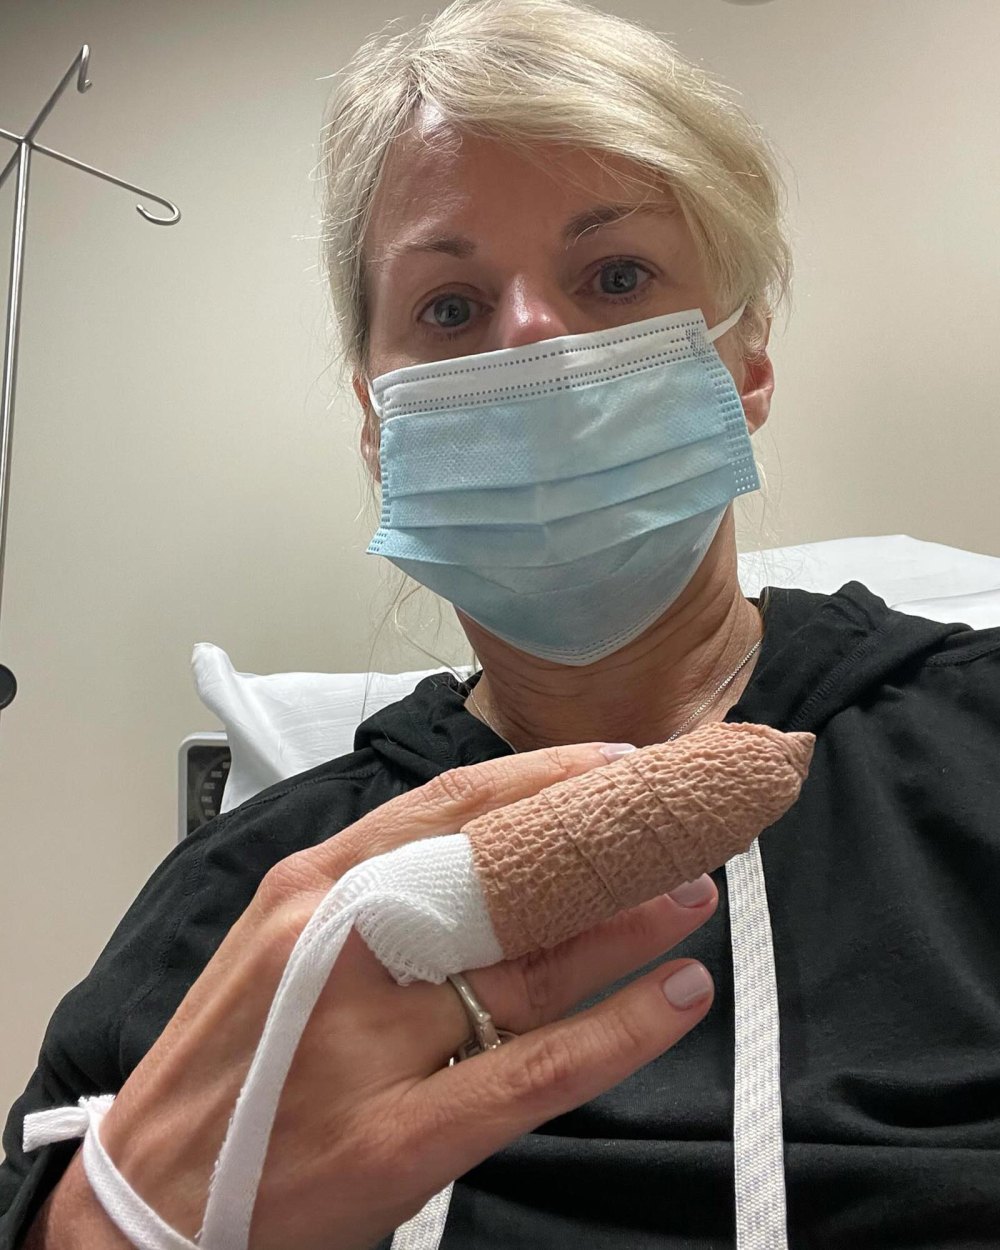 Gretchen Carlson Almost Lost Finger Cutting Onion, Jokes She’s Giving The Finger Amid Recovery